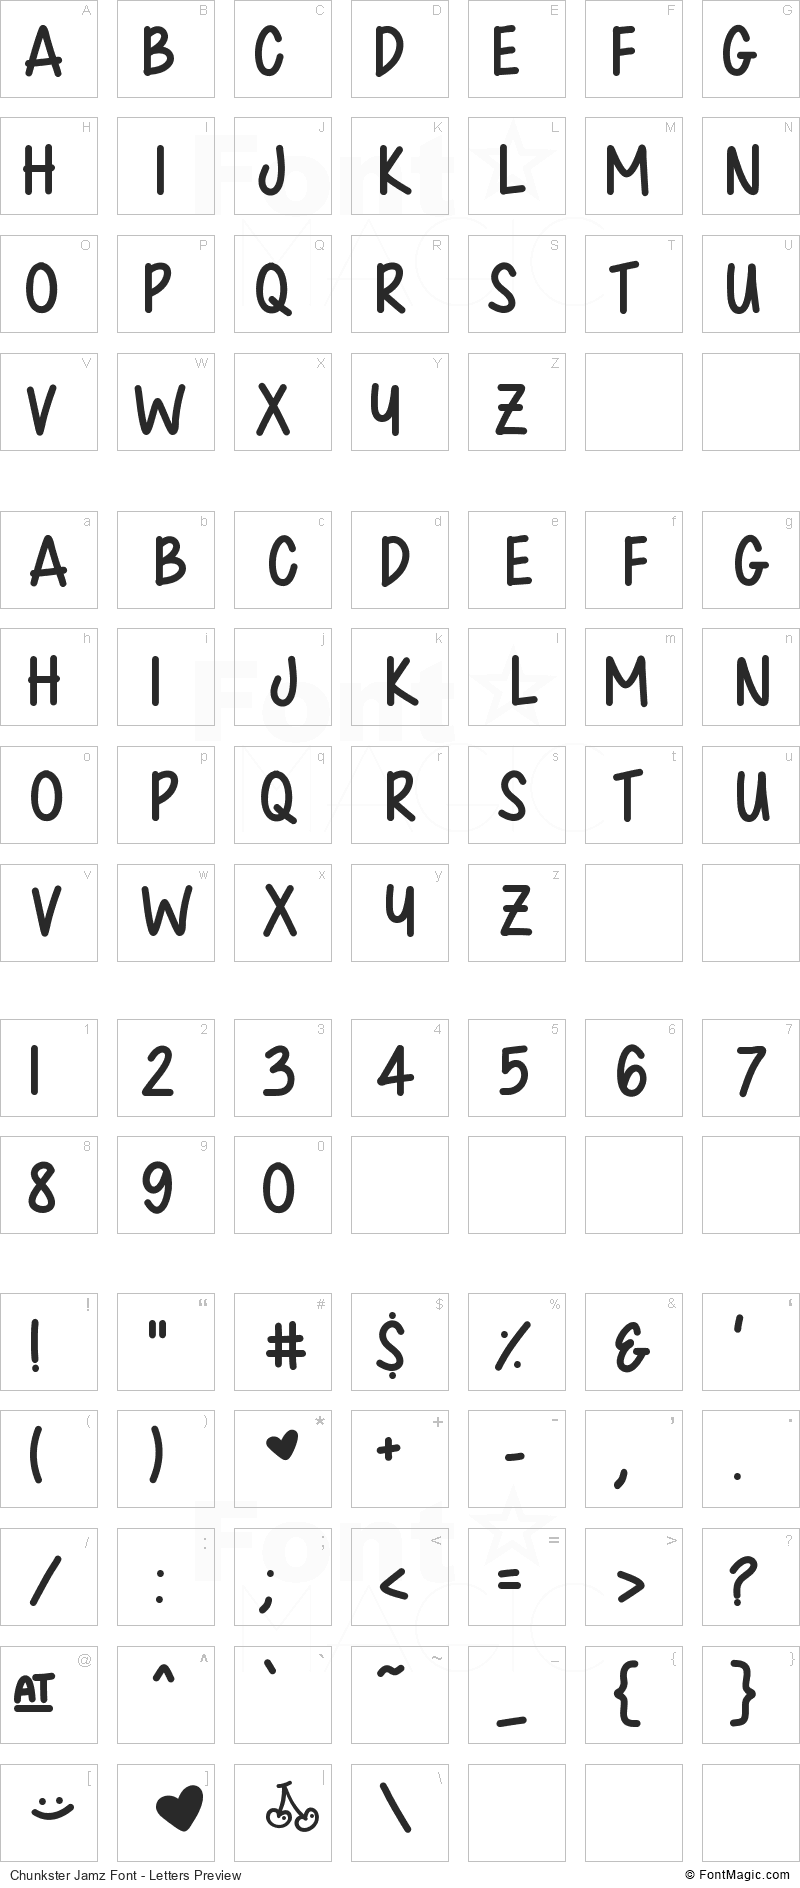 Chunkster Jamz Font - All Latters Preview Chart